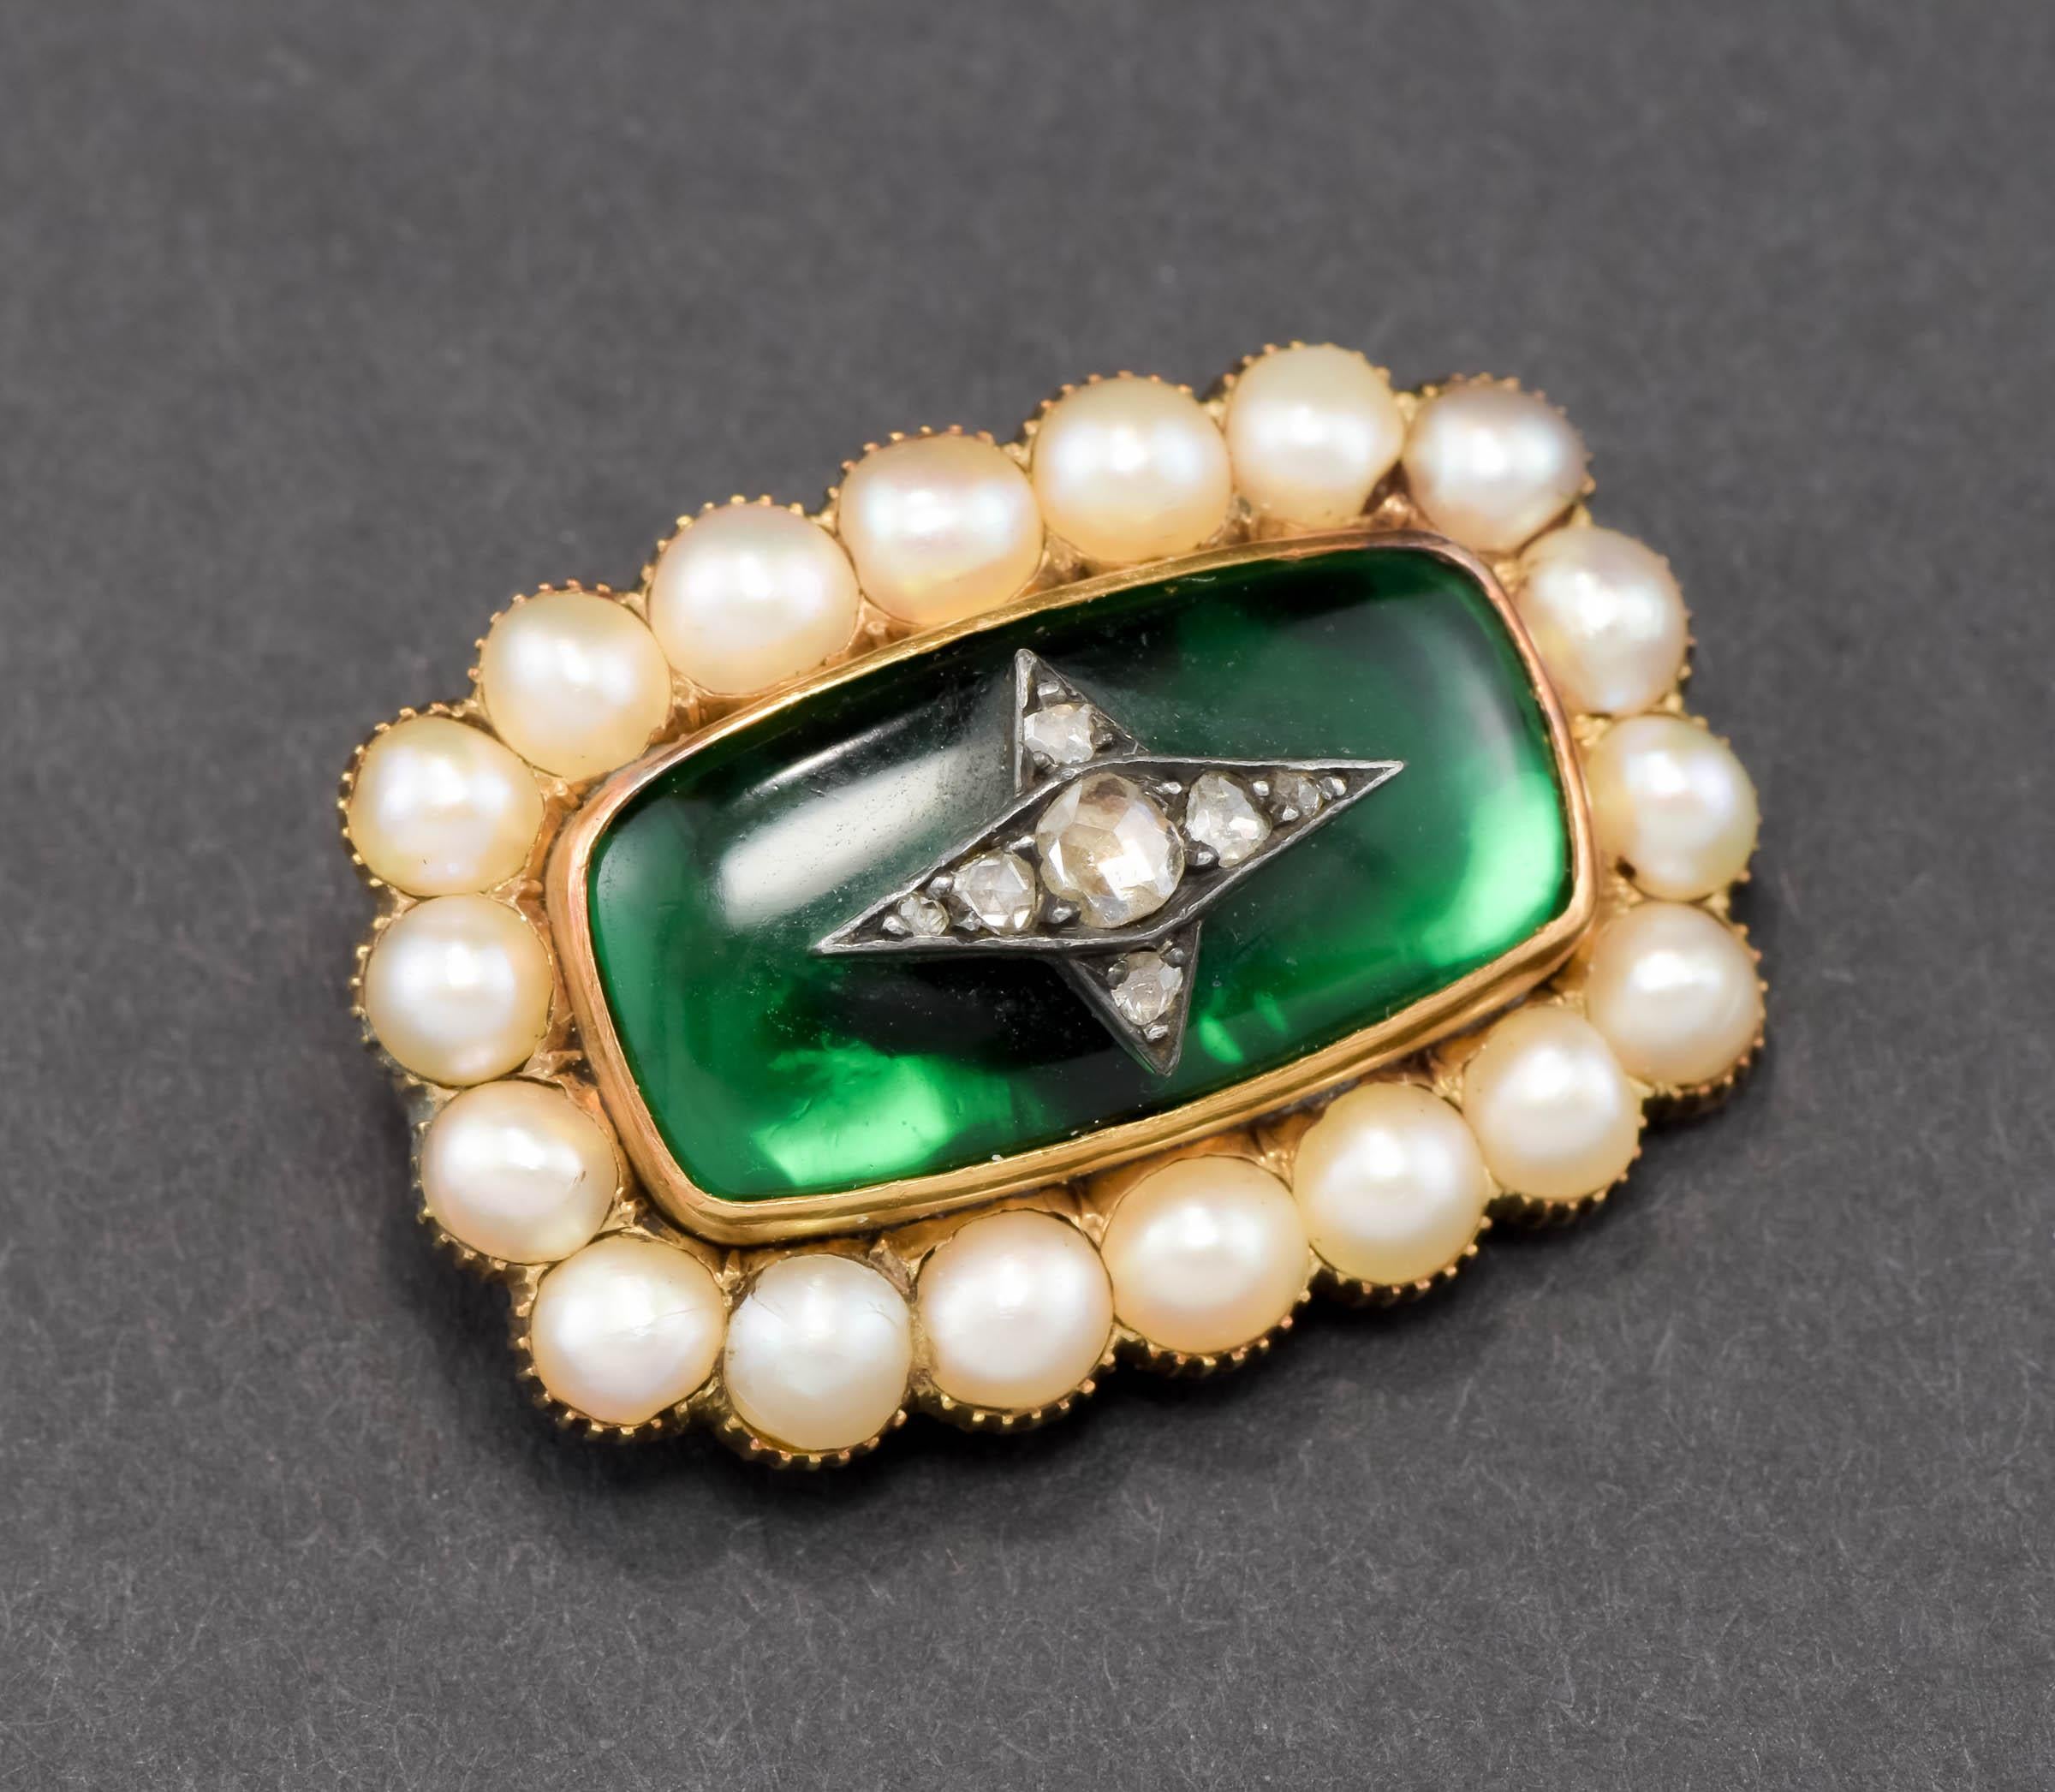 Antique Diamond Star Brooch Pin with Glowing Green & Pearls - or Convert to Ring In Good Condition For Sale In Danvers, MA